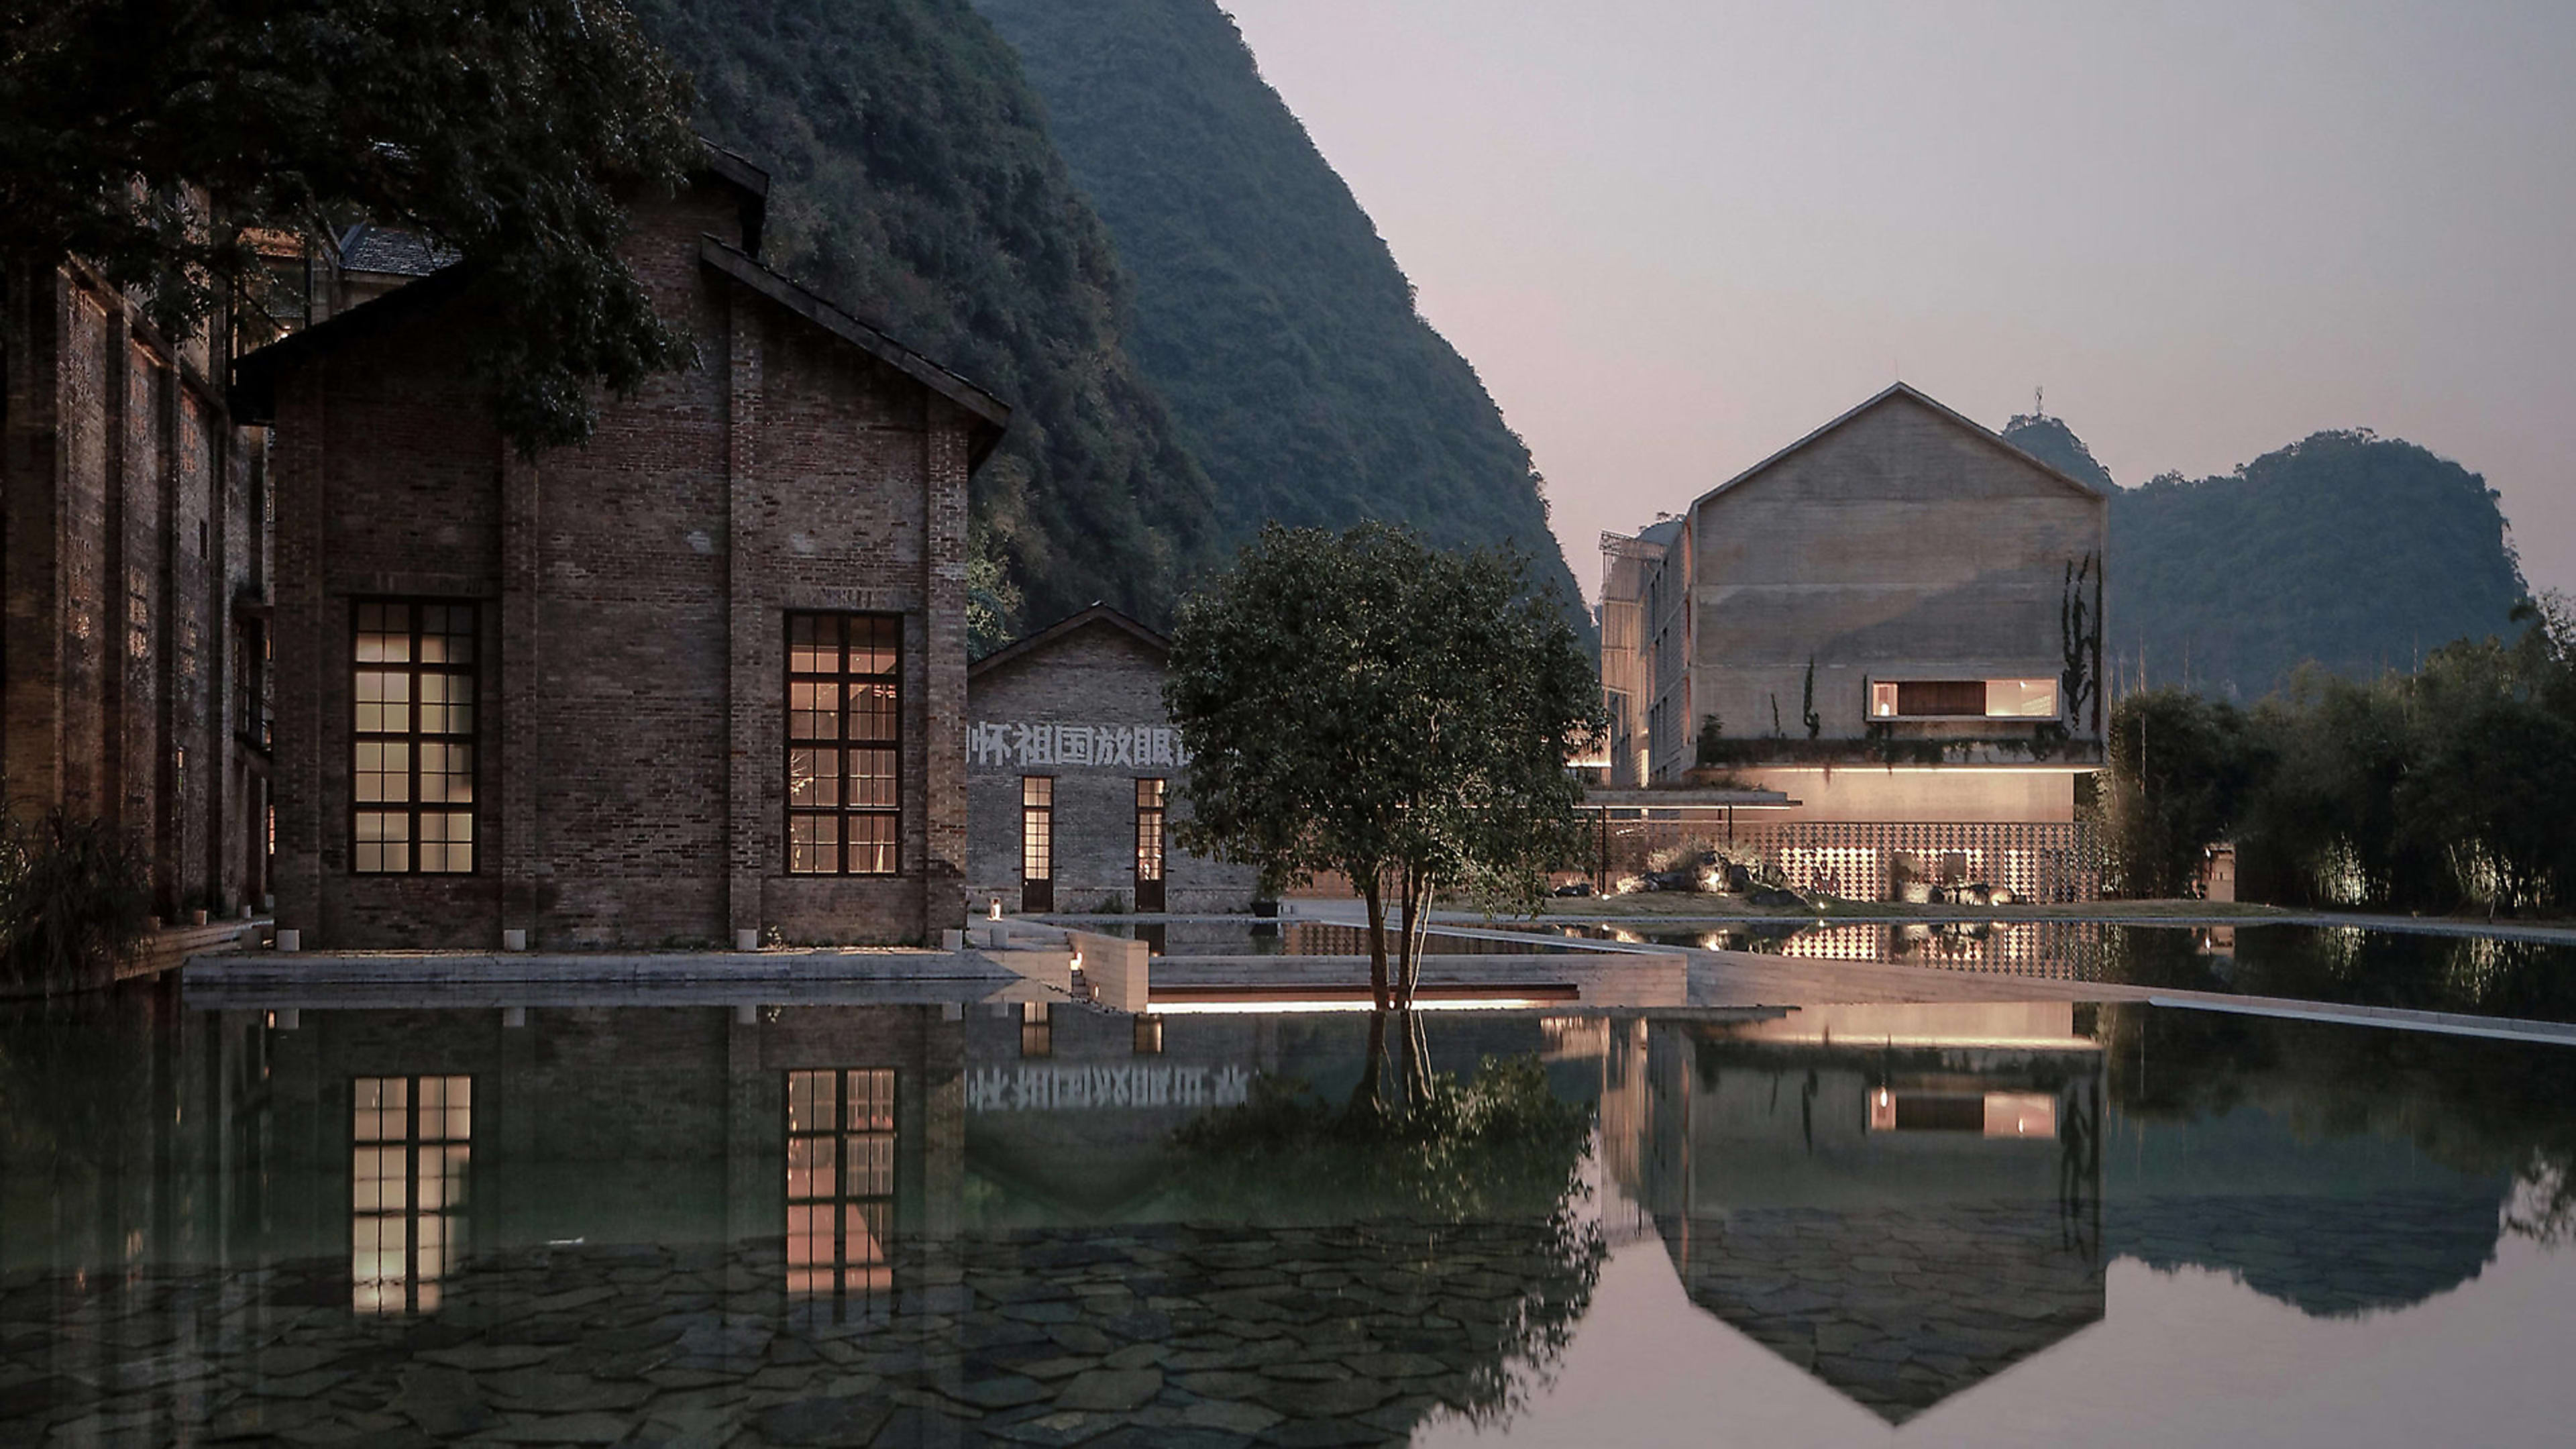 For a glimpse at the future of sustainable architecture, look to China